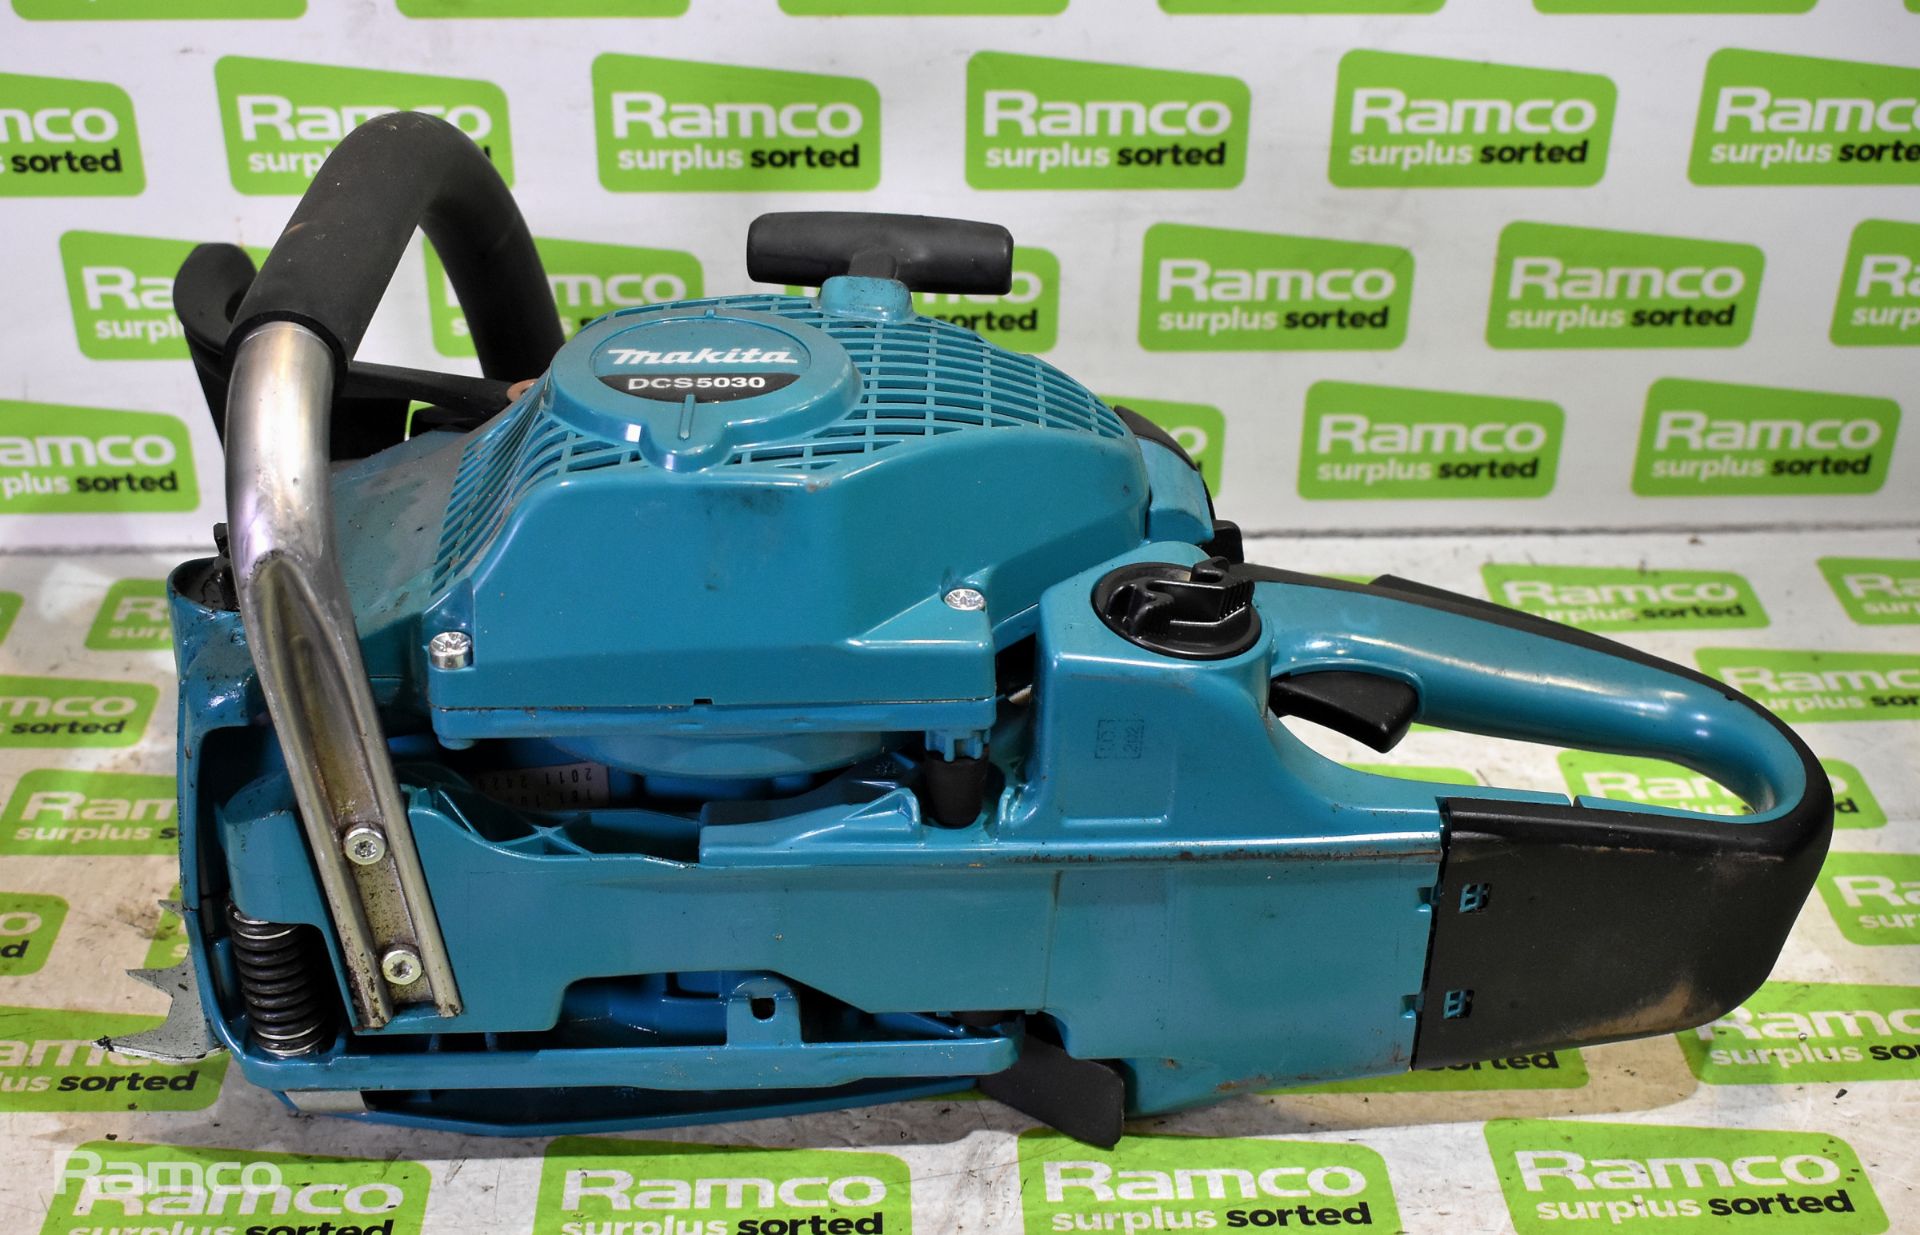 4x Makita DCS5030 50cc petrol chainsaws - BODIES ONLY - AS SPARES OR REPAIRS - Image 6 of 22